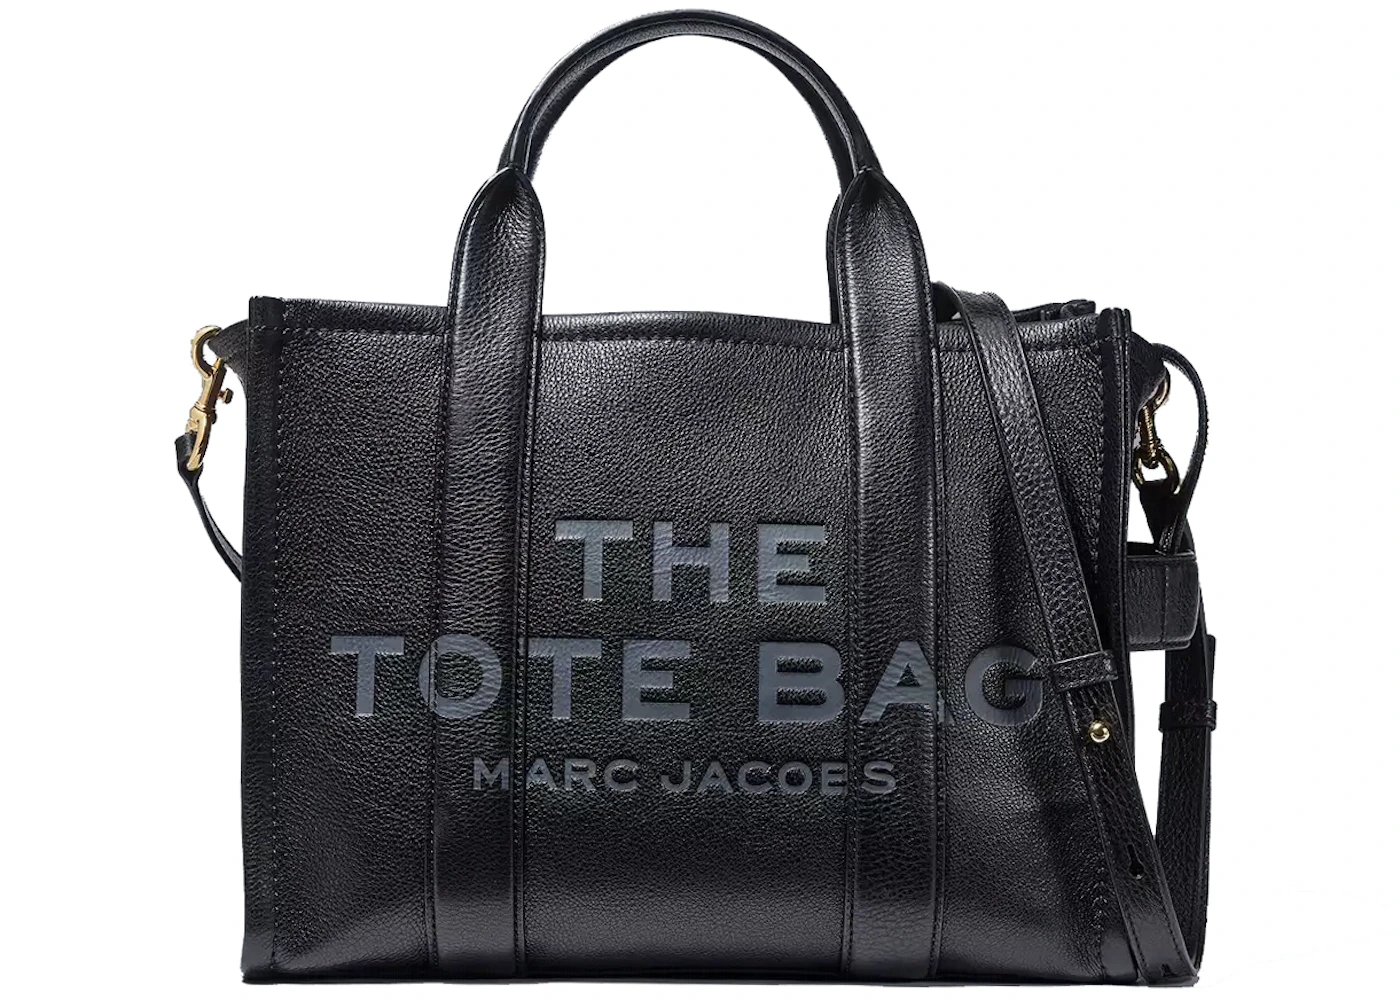 Marc Jacobs The Leather Tote Bag Medium Black in Grain Leather with ...